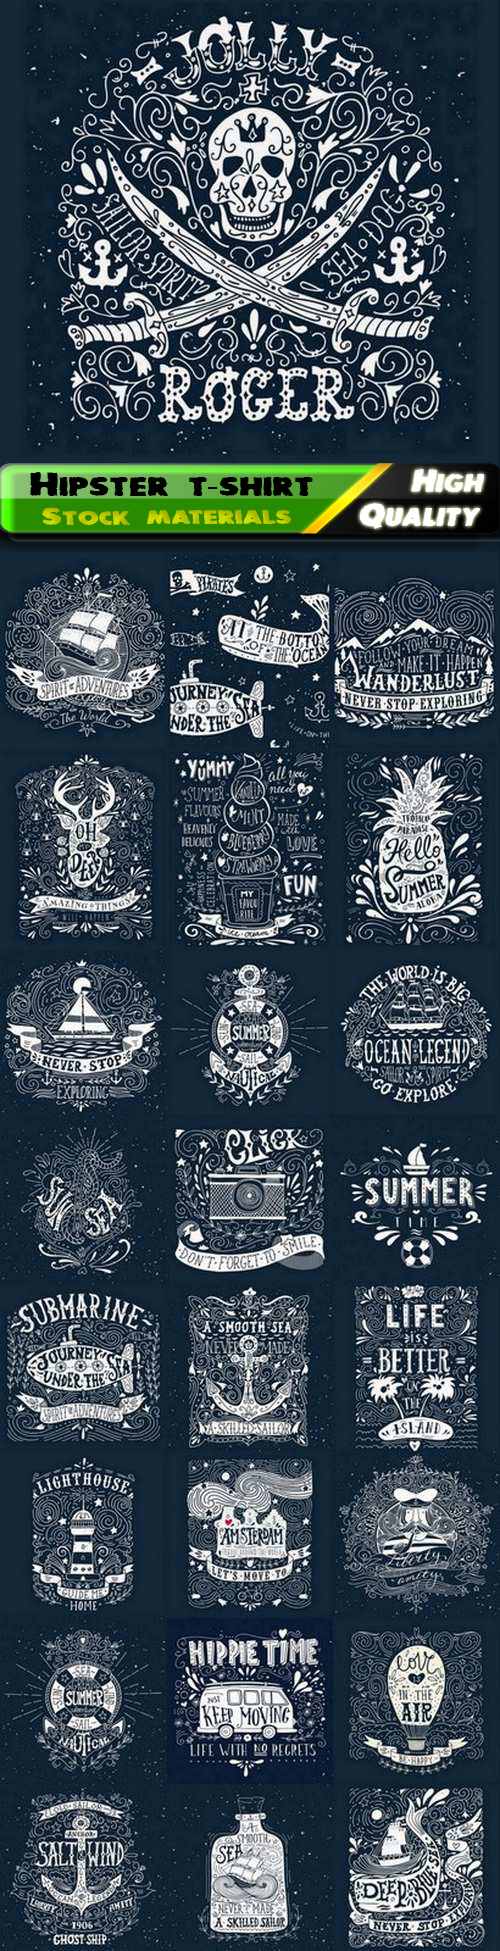 Vintage hipster style label and fashion t-shirt print design - 25 Eps